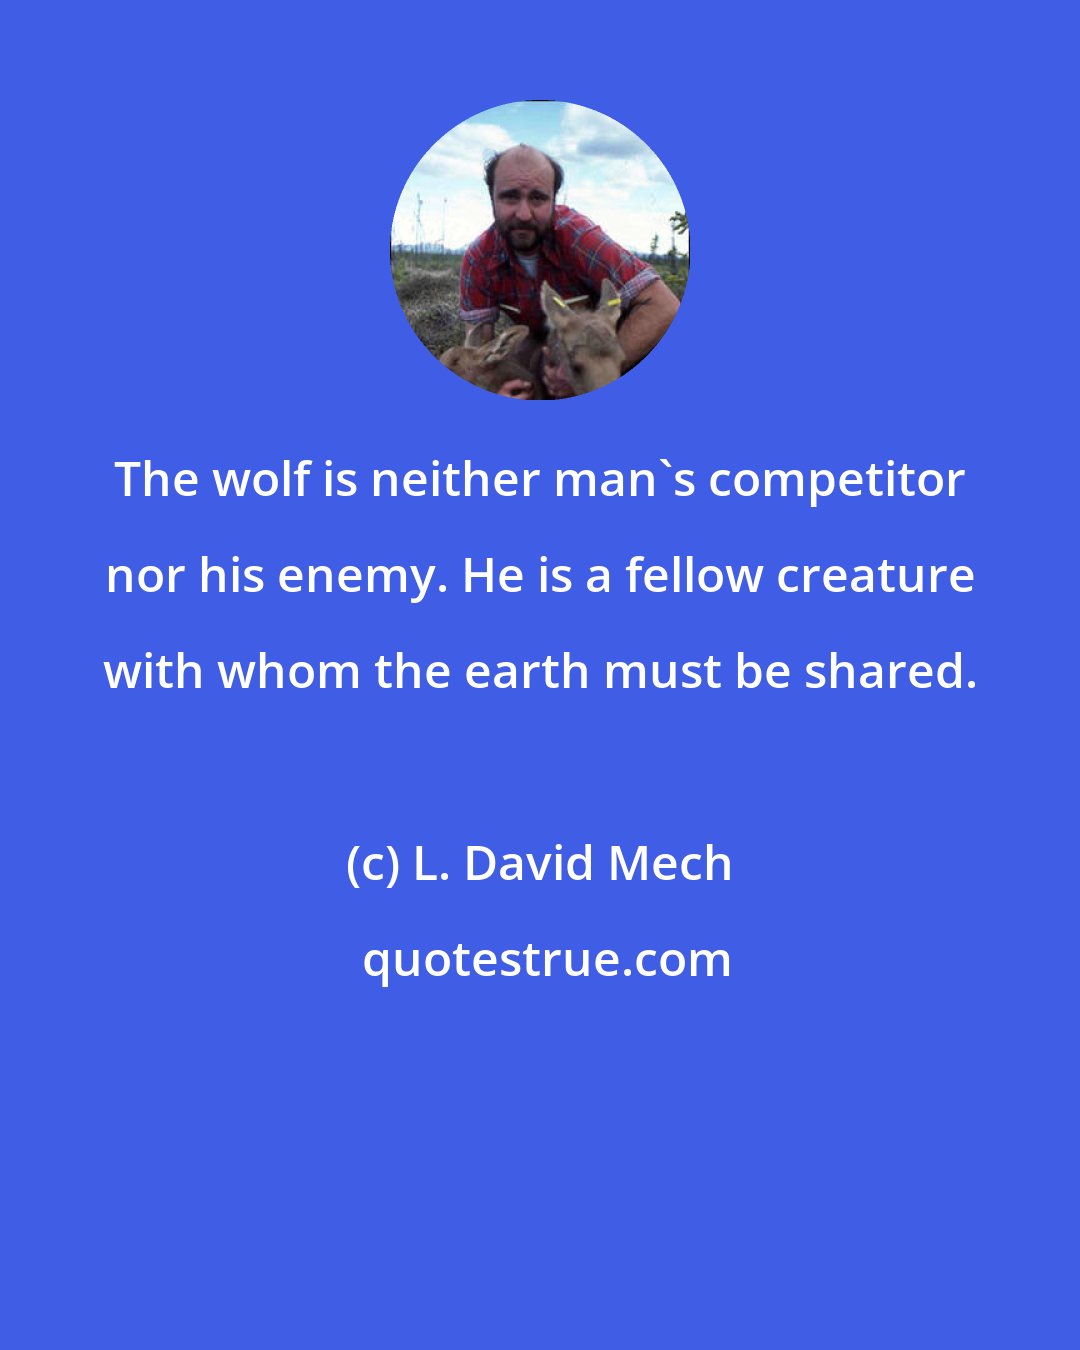 L. David Mech: The wolf is neither man's competitor nor his enemy. He is a fellow creature with whom the earth must be shared.